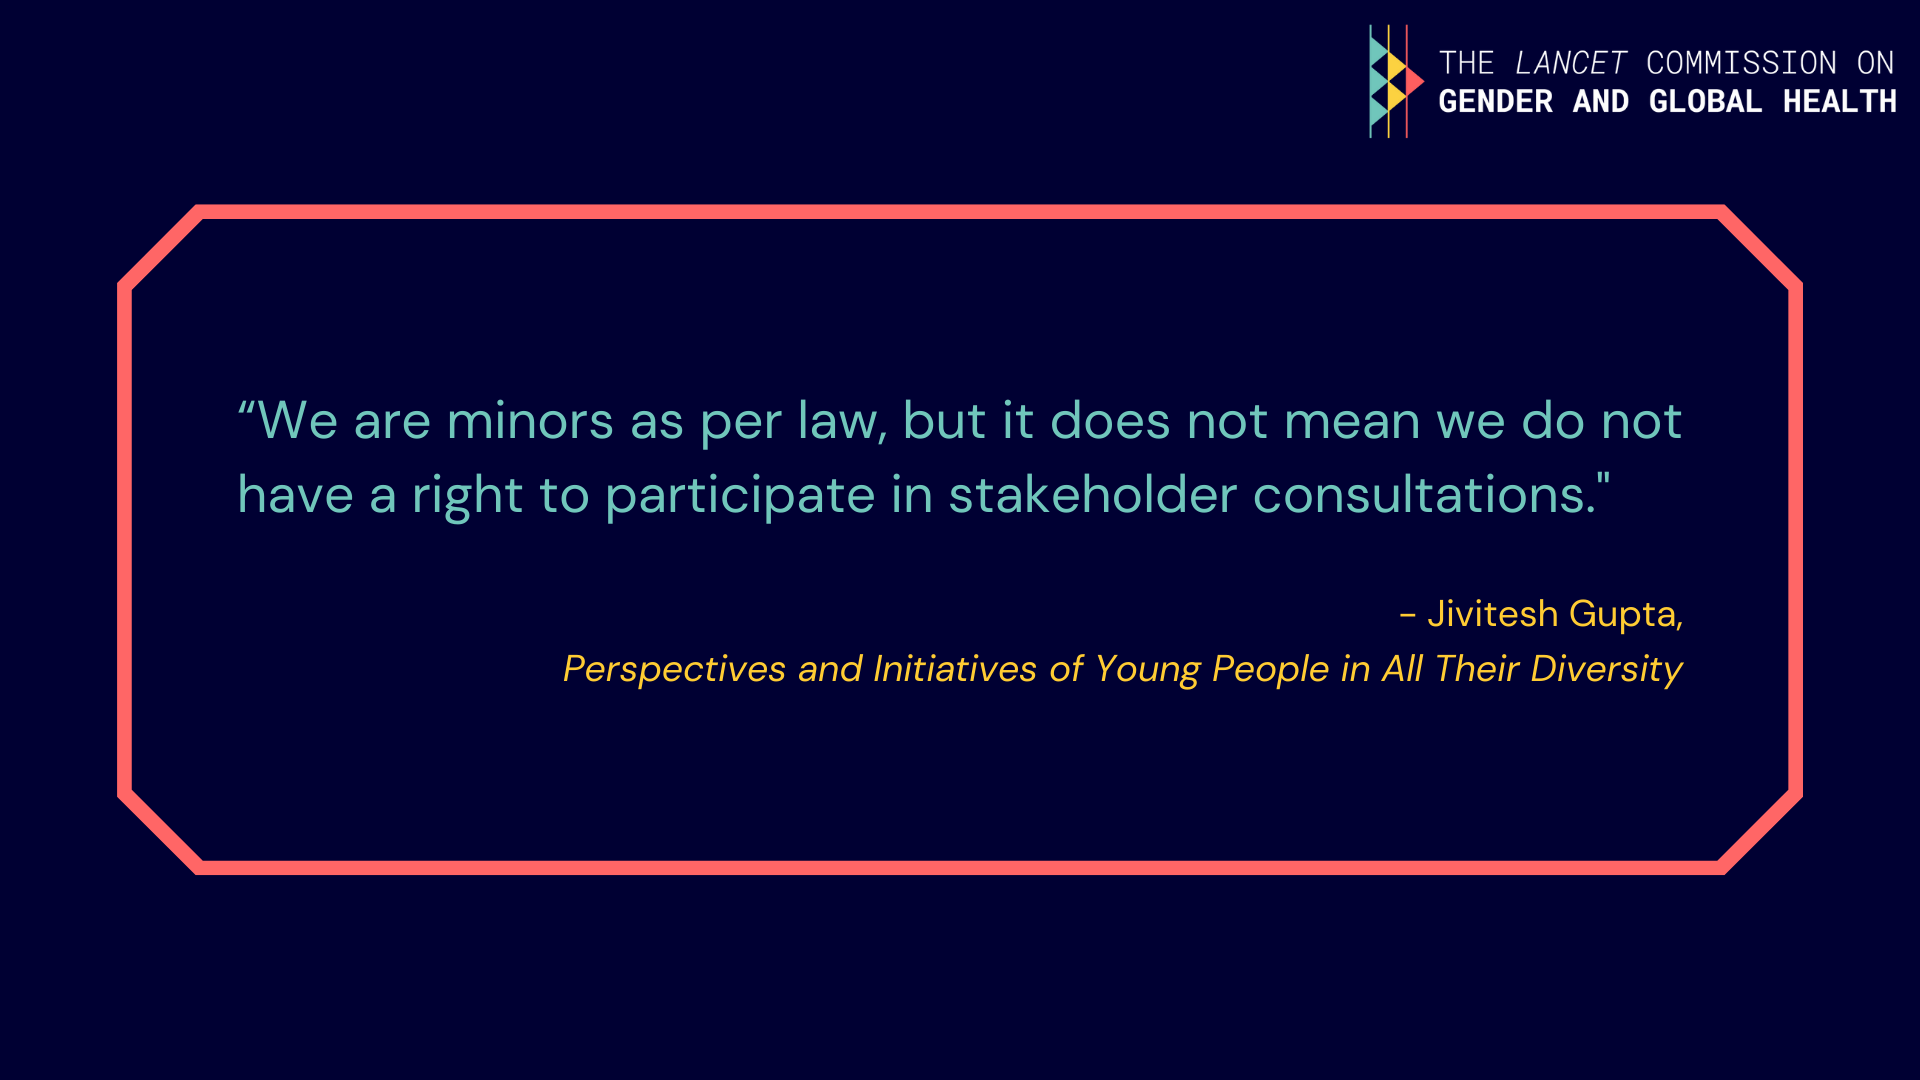 Quote from Jivitesh Gupta: "We are minors as per law, but it does not mean we do not have a right to participate in stakeholder consultations".